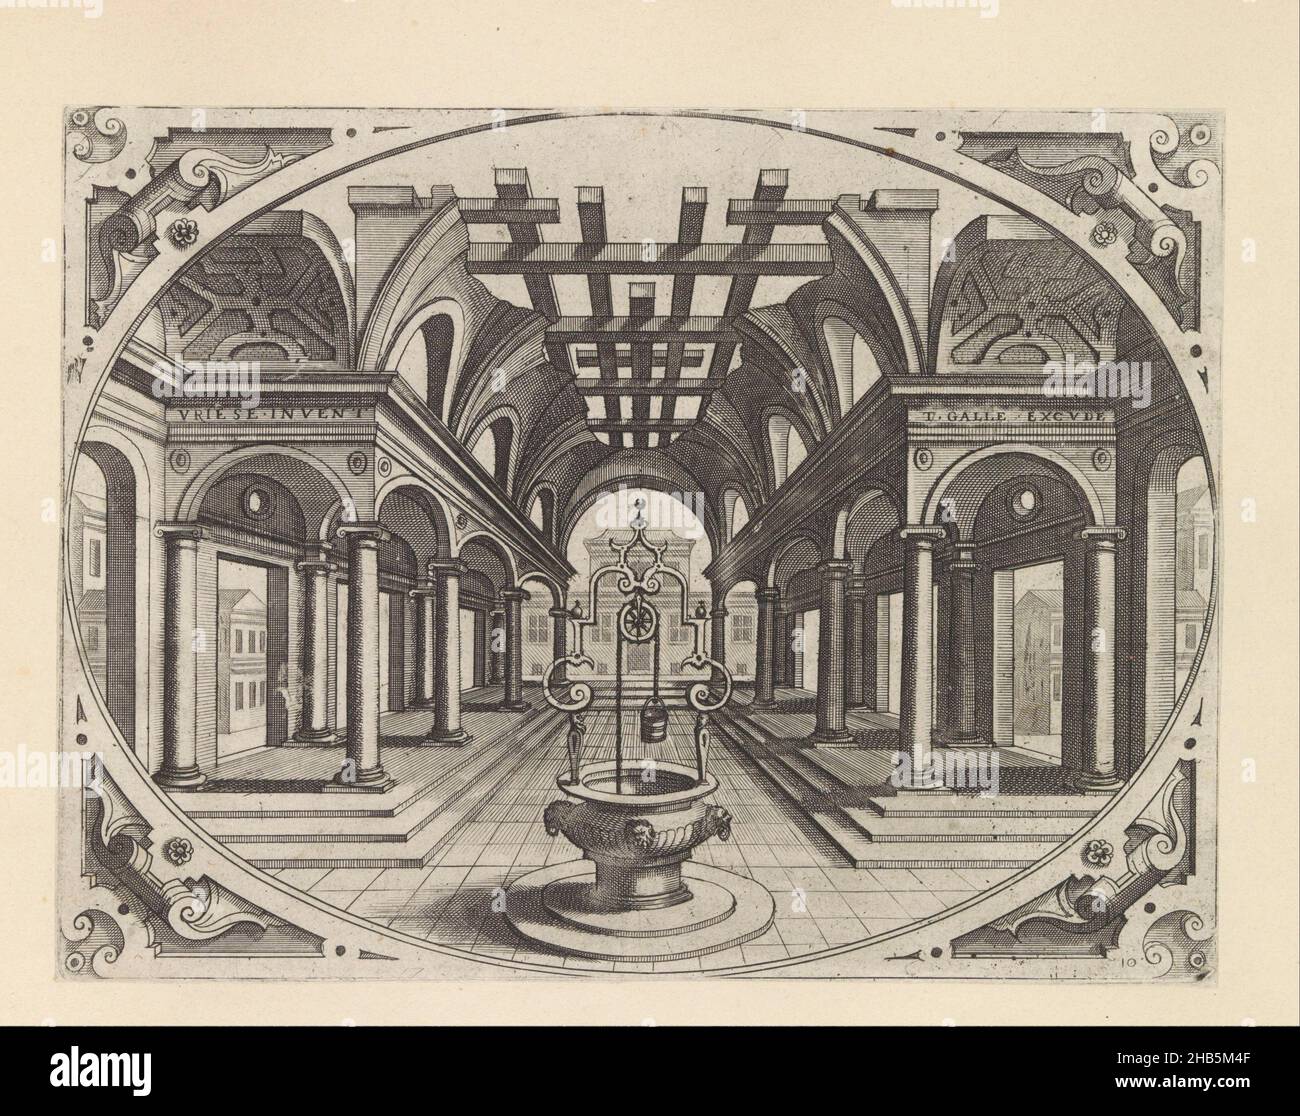 Colonnade with a ruined vault and a well, Variae Architecturae Formae (...) (series title), Architectural perspectives in oval frames for intarsia (series title), View into a colonnade with a ruined vault, covered with beams. In the foreground a well. In the corners scrollwork. The print is part of an album., print maker: Johannes of Lucas van Doetechum, Hans Vredeman de Vries (mentioned on object), Antwerp, after 1601, paper, etching, height 163 mm × width 215 mm Stock Photo